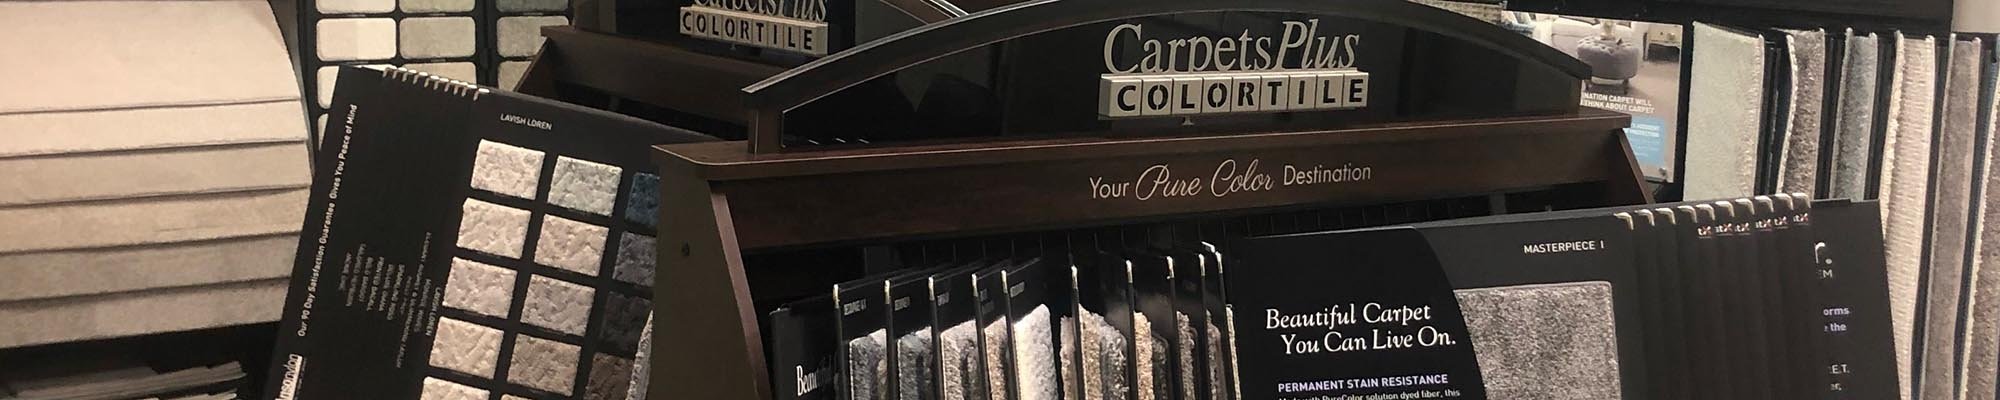 Local Flooring Retailer in Terre Haute, IN - Smiddy's CarpetsPlus COLORTILE providing a wide selection of flooring and expert advice.